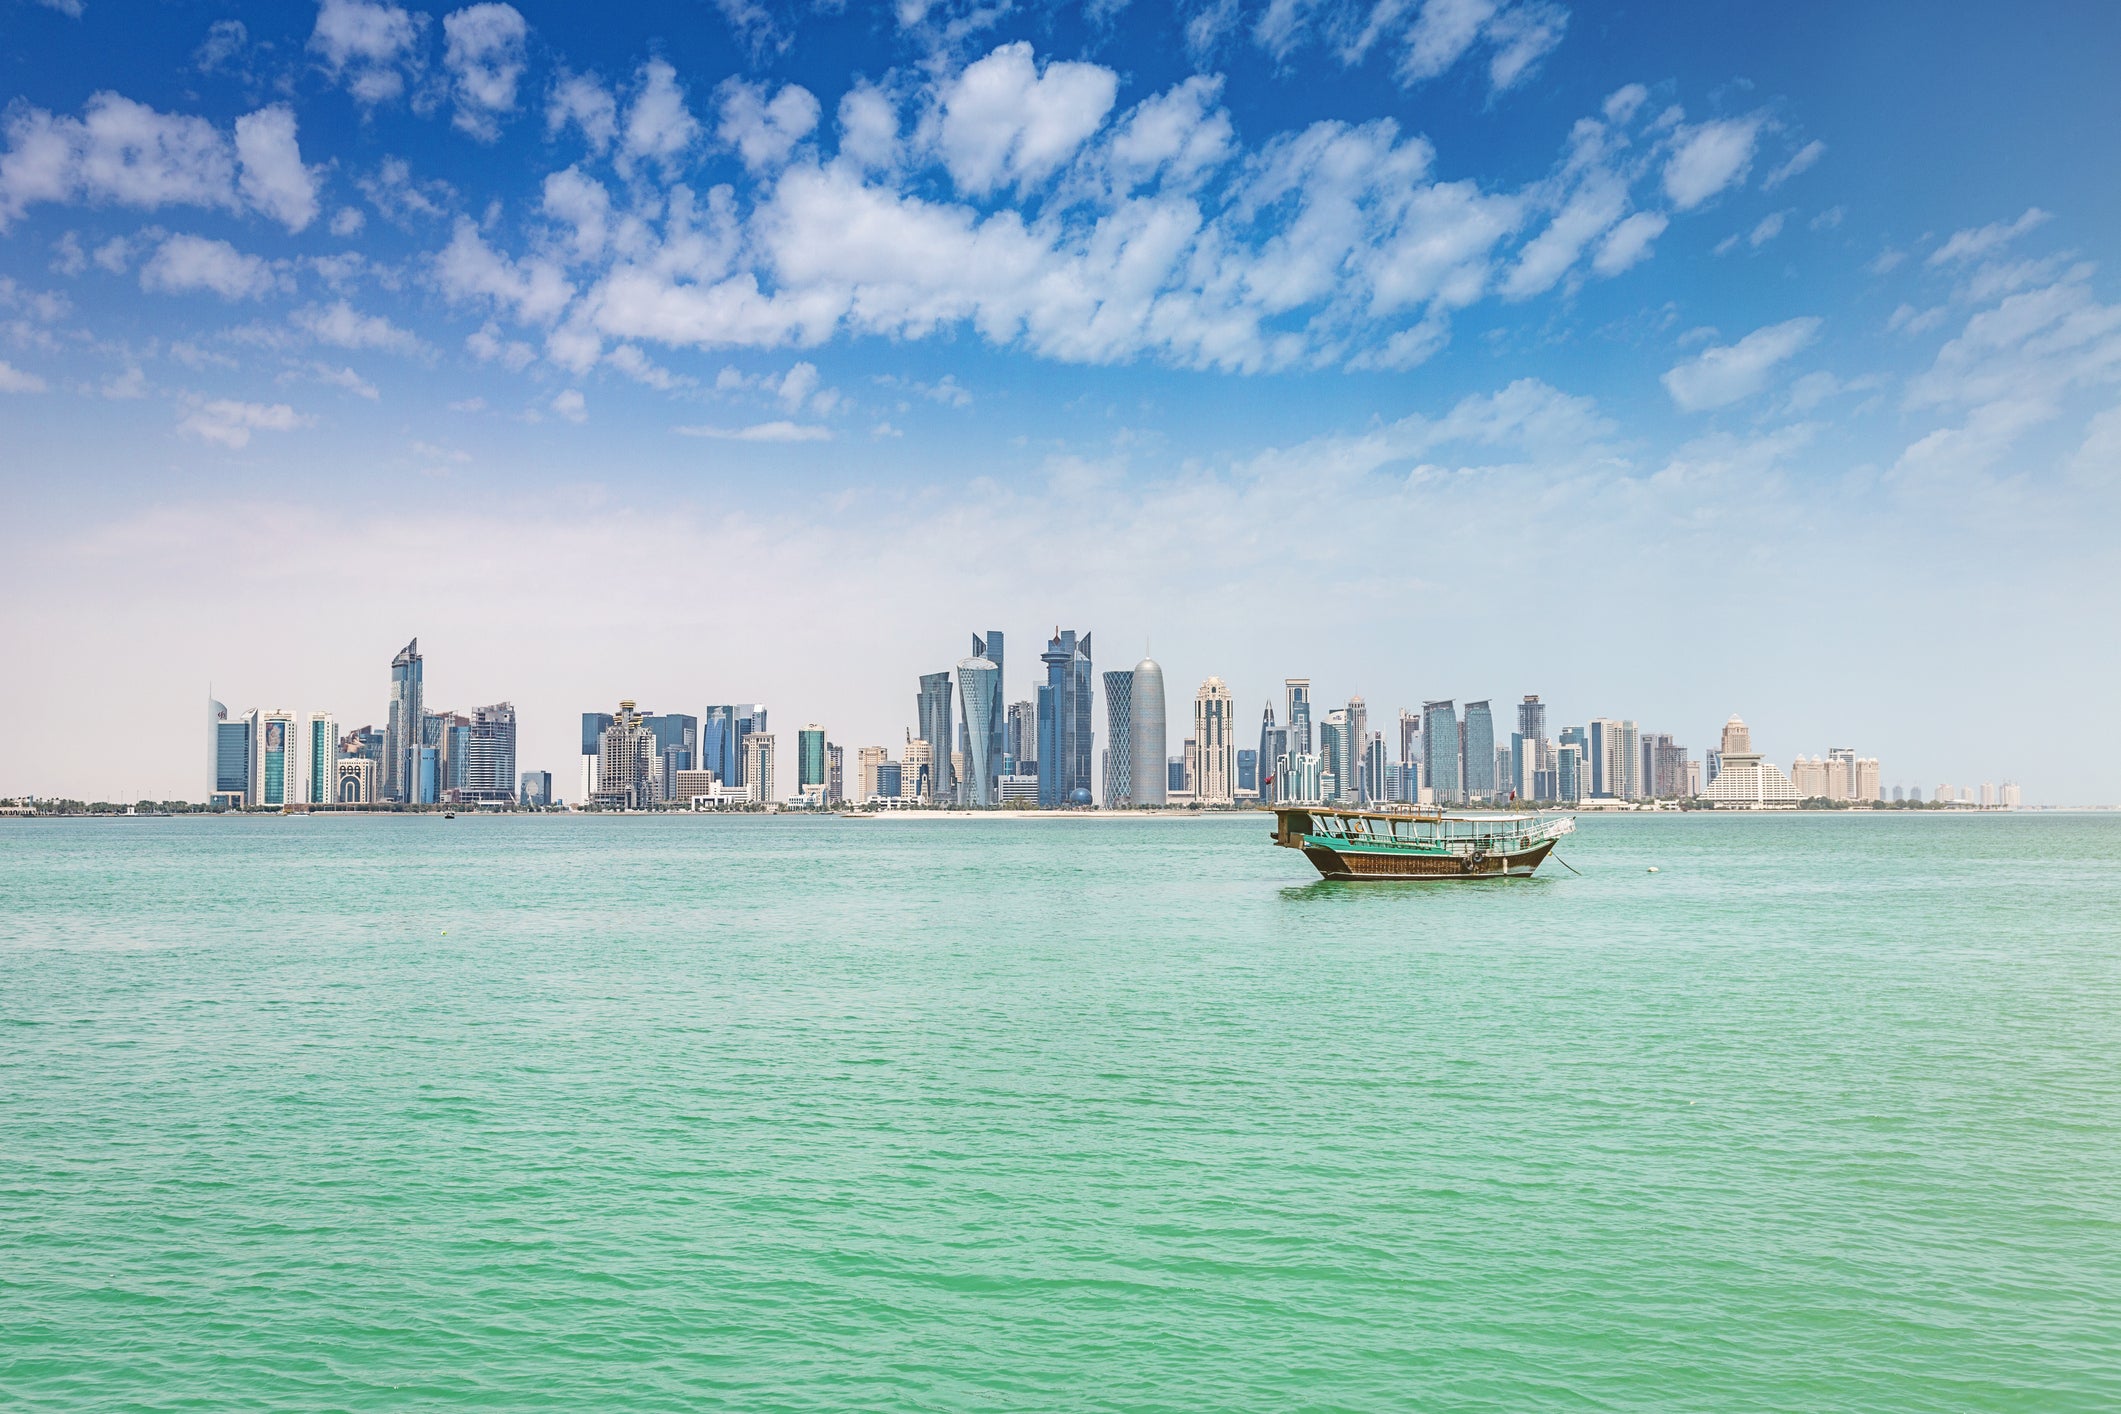 A constantly evolving skyline welcomes visitors to Doha